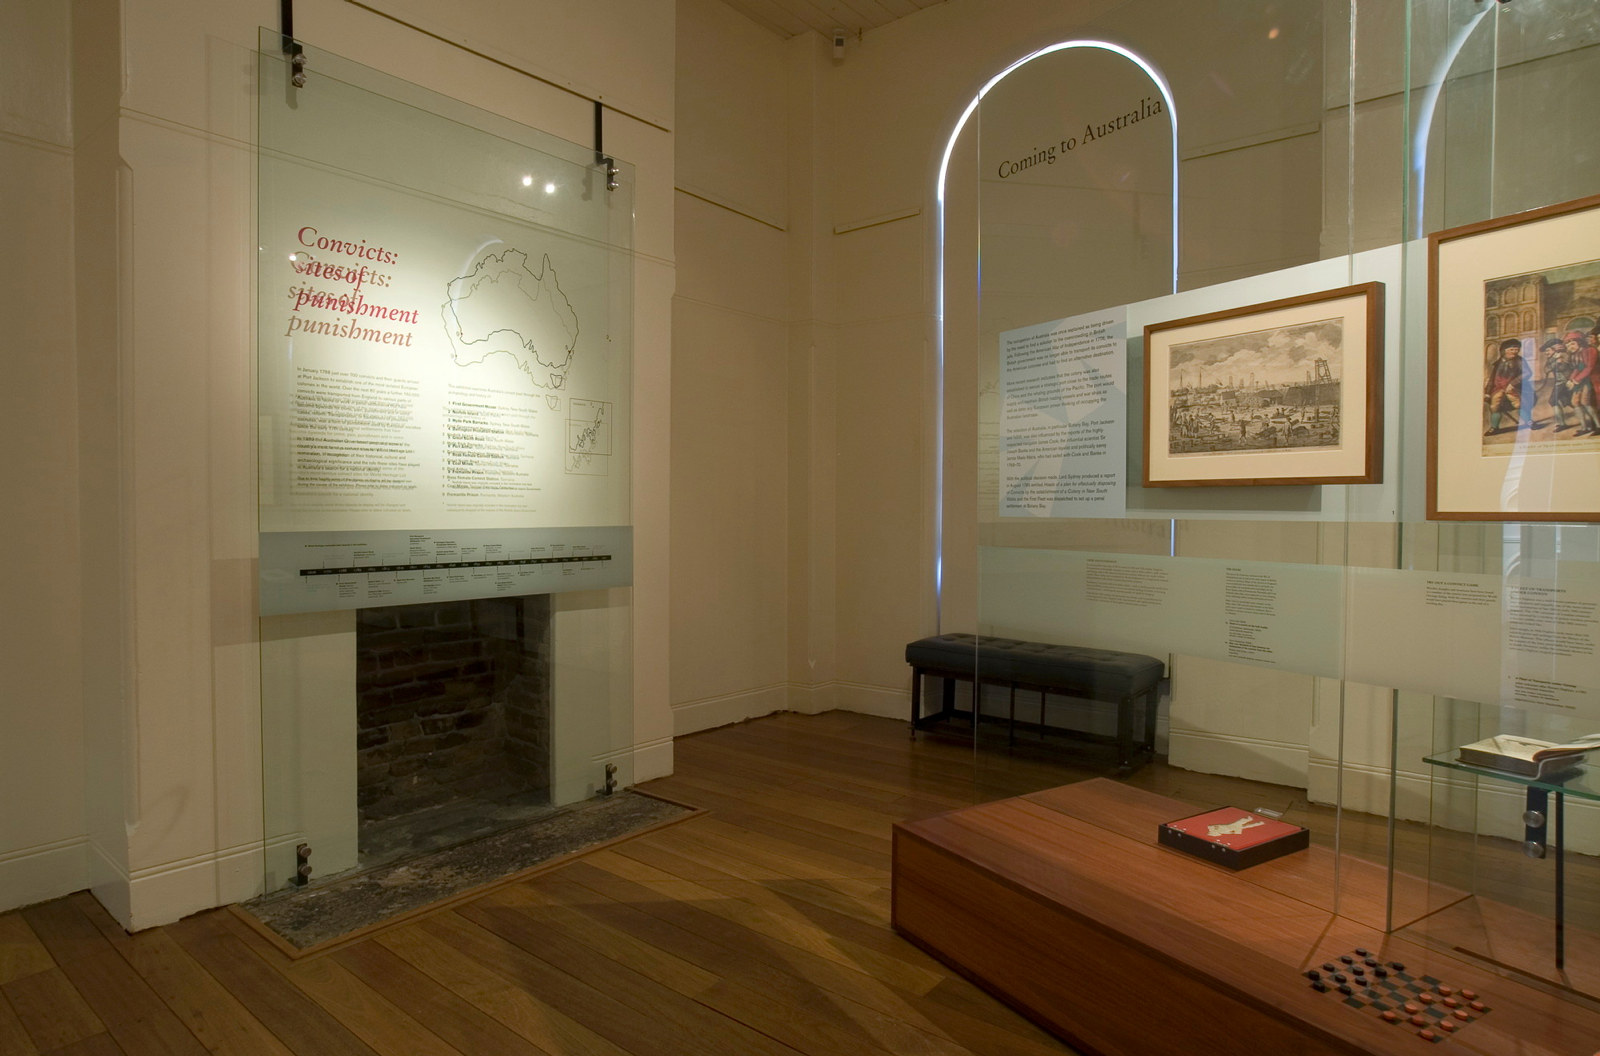 Documentation of Convicts: sites of punishment exhibition showing exhibition panel and fireplace